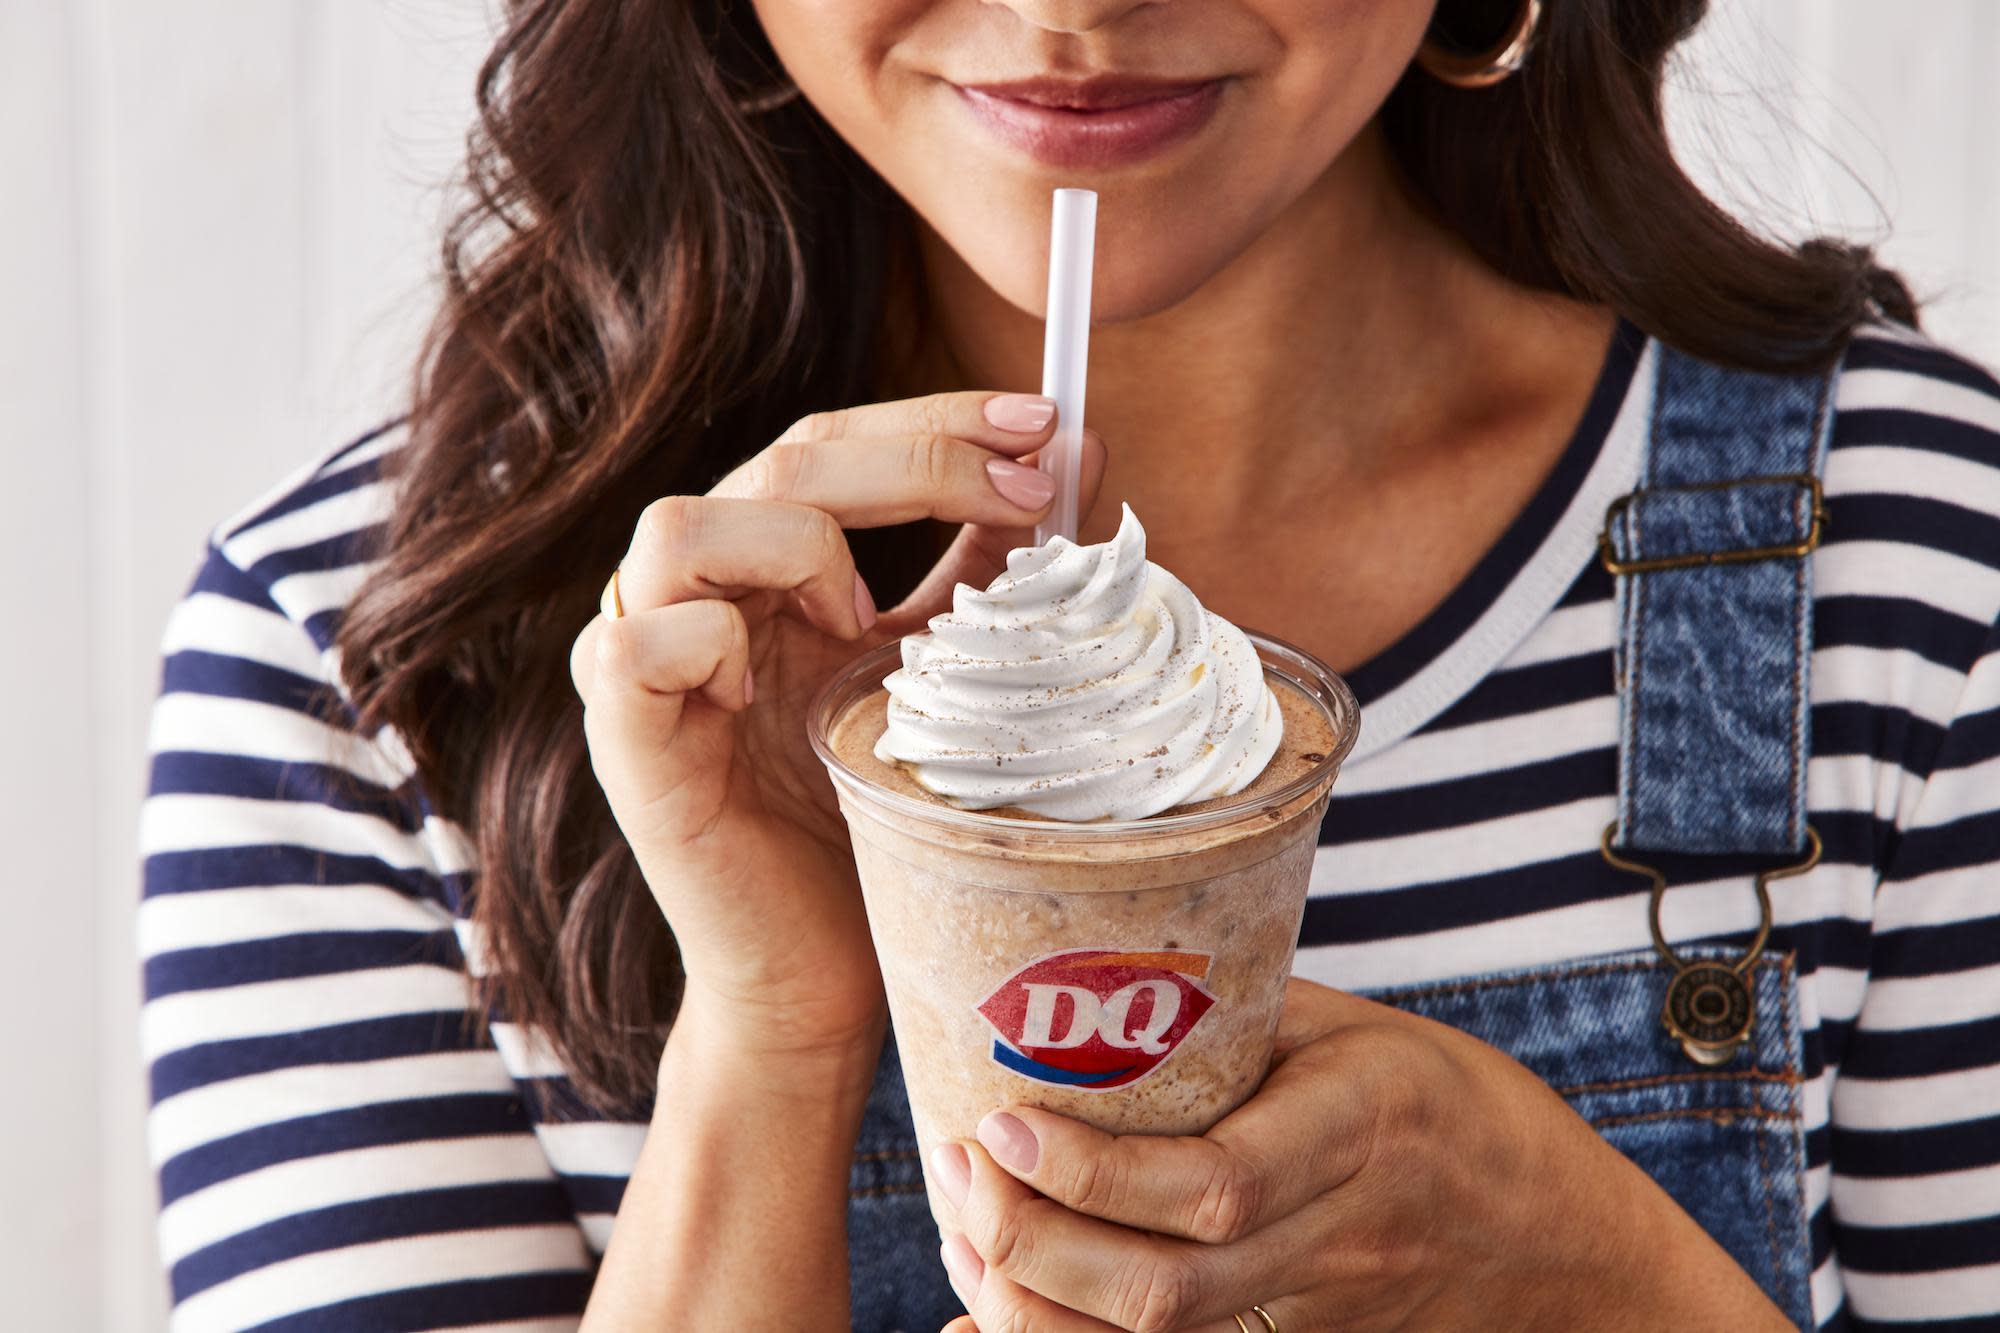 The Dairy Queen is a Black woman.